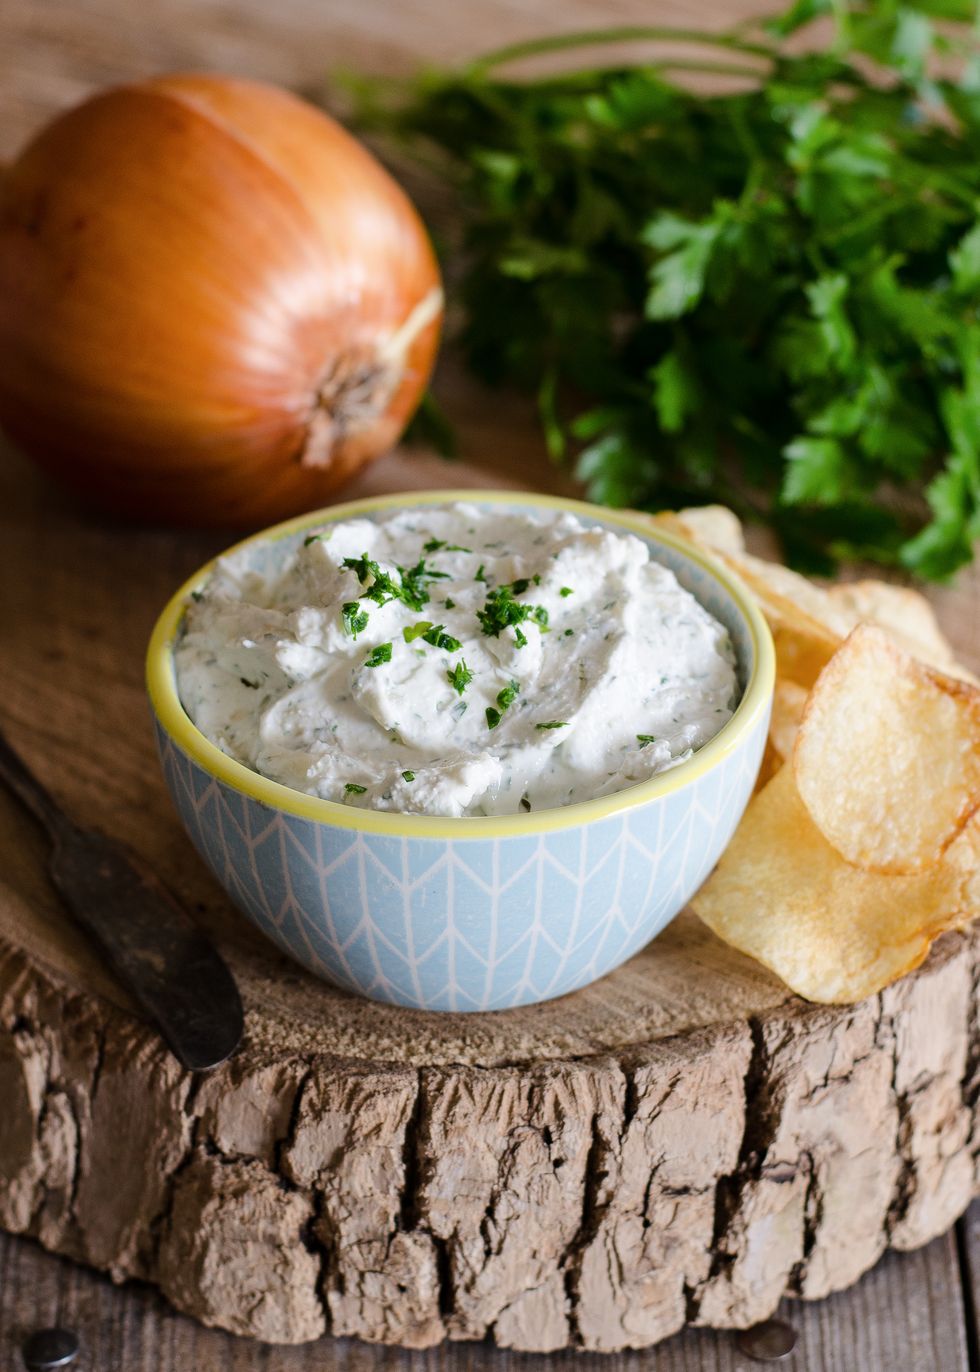 https://hips.hearstapps.com/thepioneerwoman/wp-content/uploads/2016/01/homemade-french-onion-chip-dip-11.jpg?resize=980:*